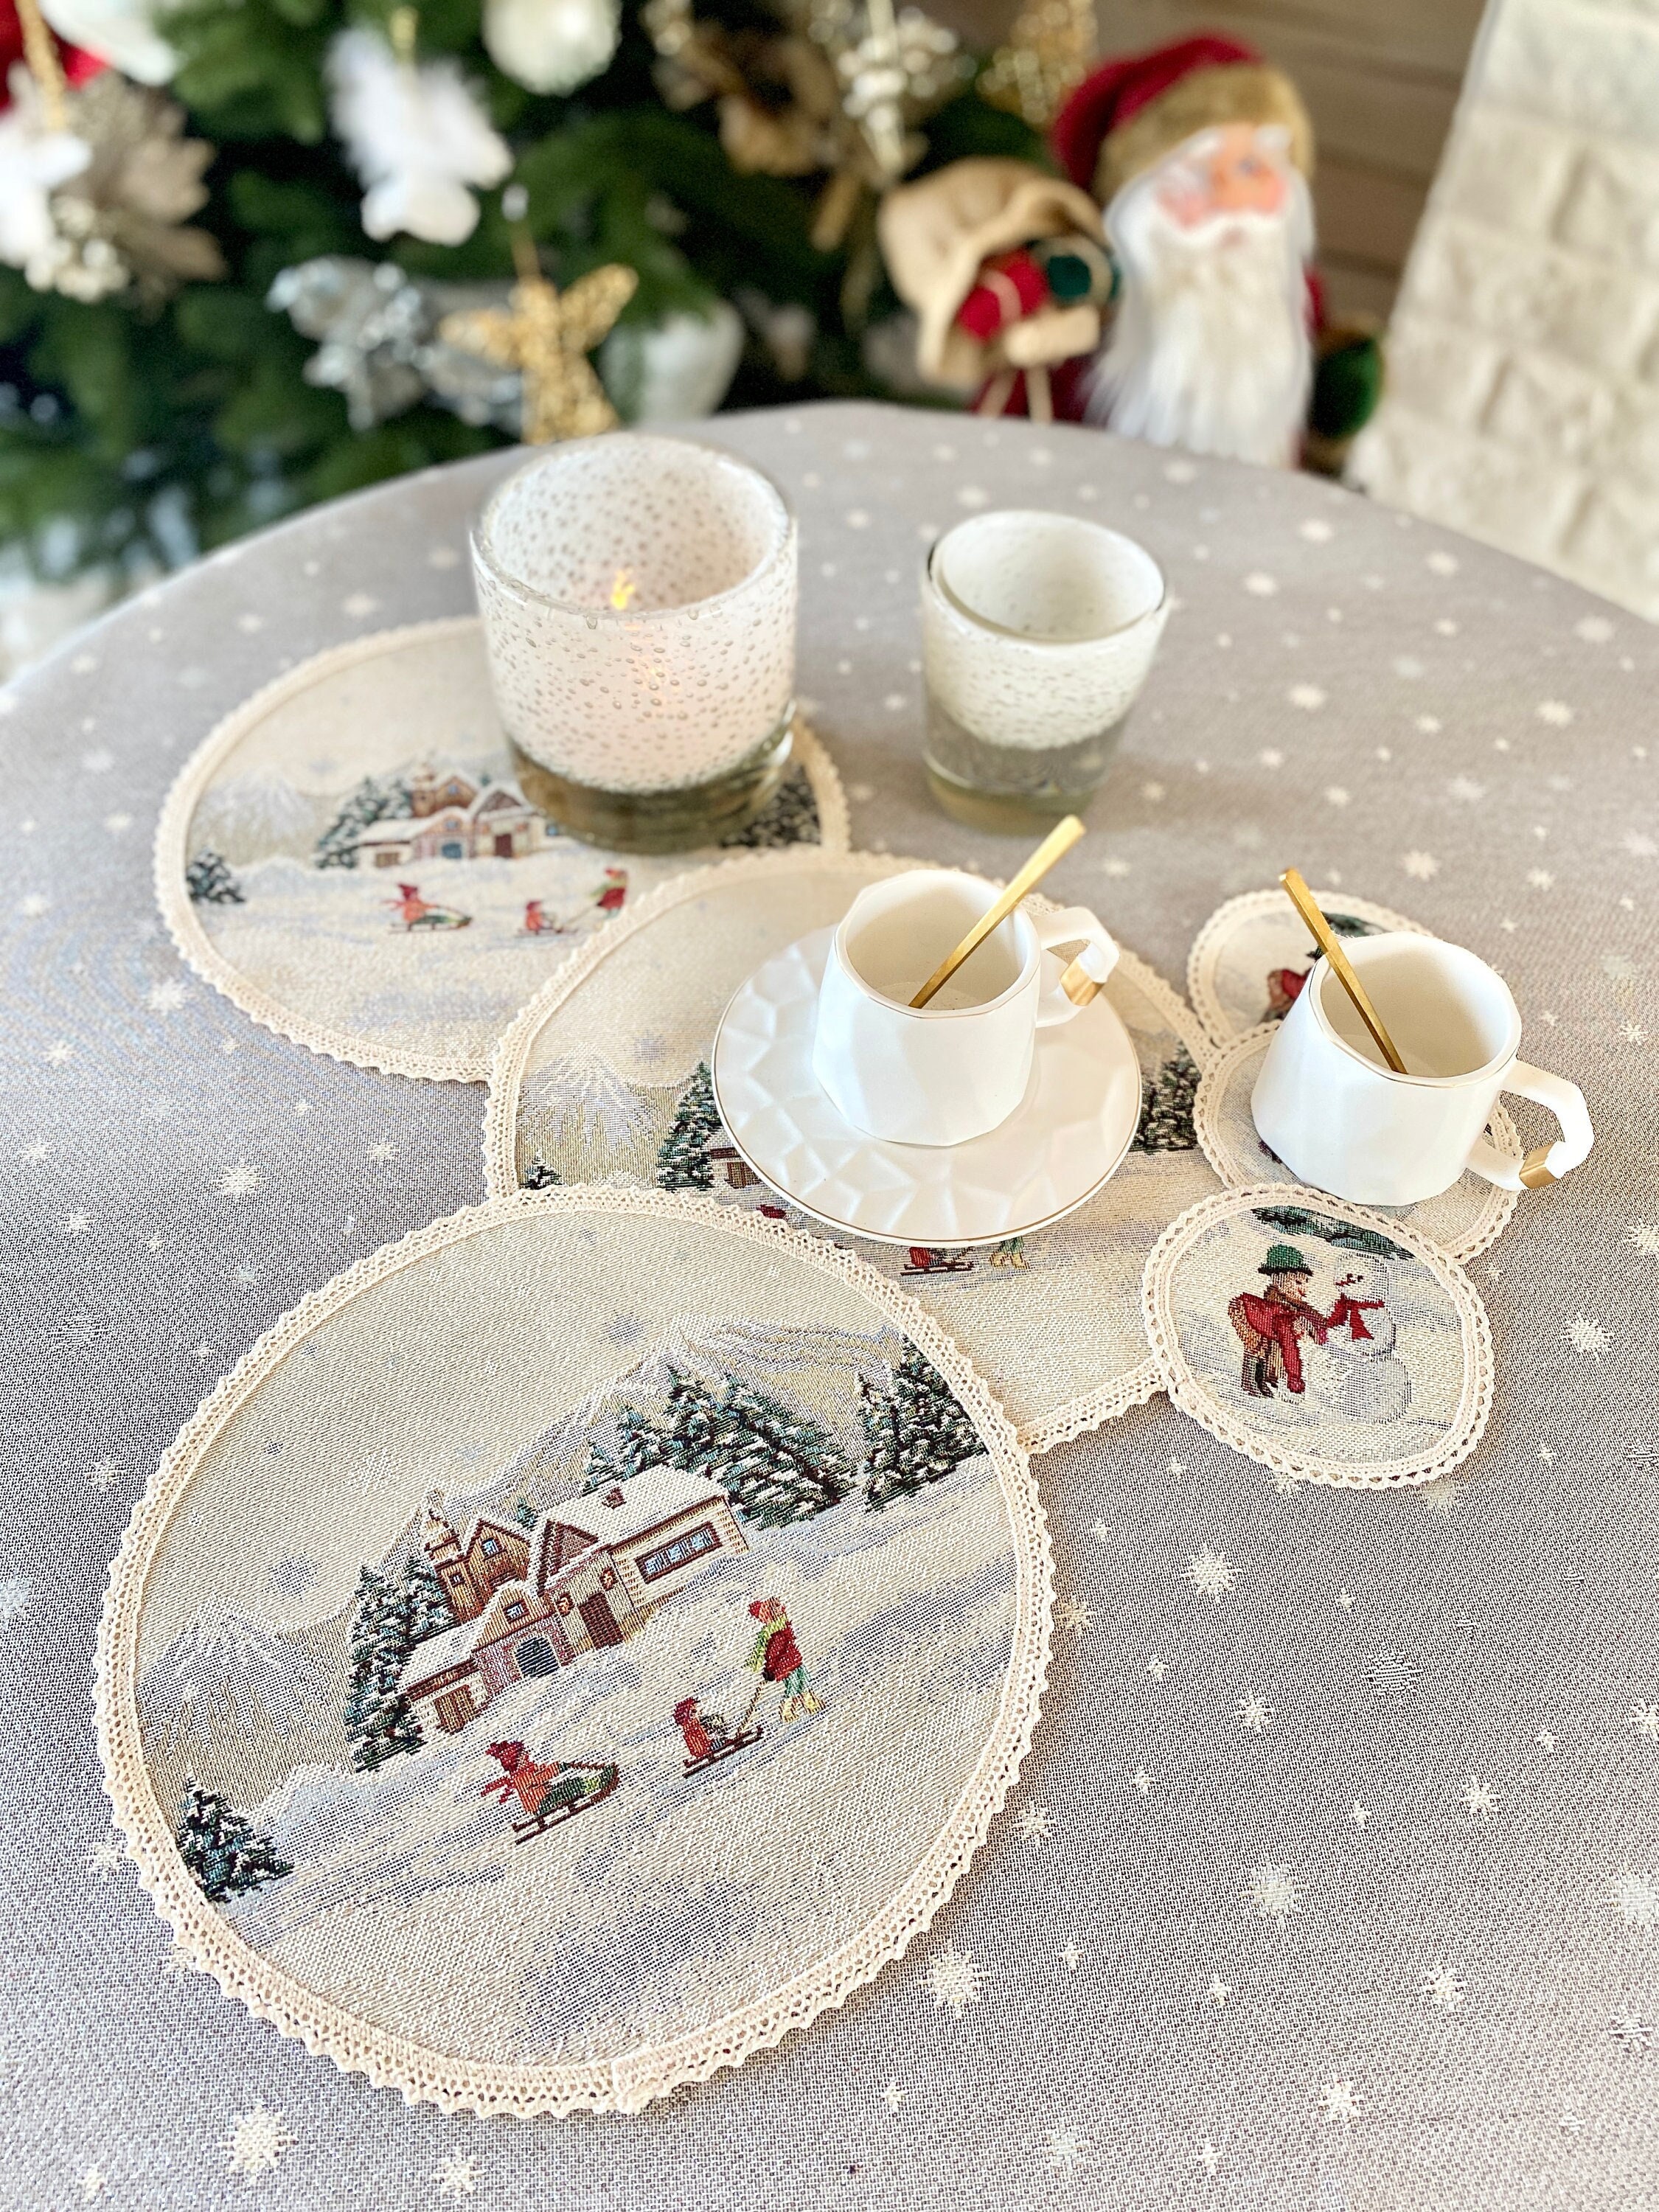 Table festive decor Christmas New Year table linens Christmas snowy winter cup placemats New Year room decor Kitchen holiday decor